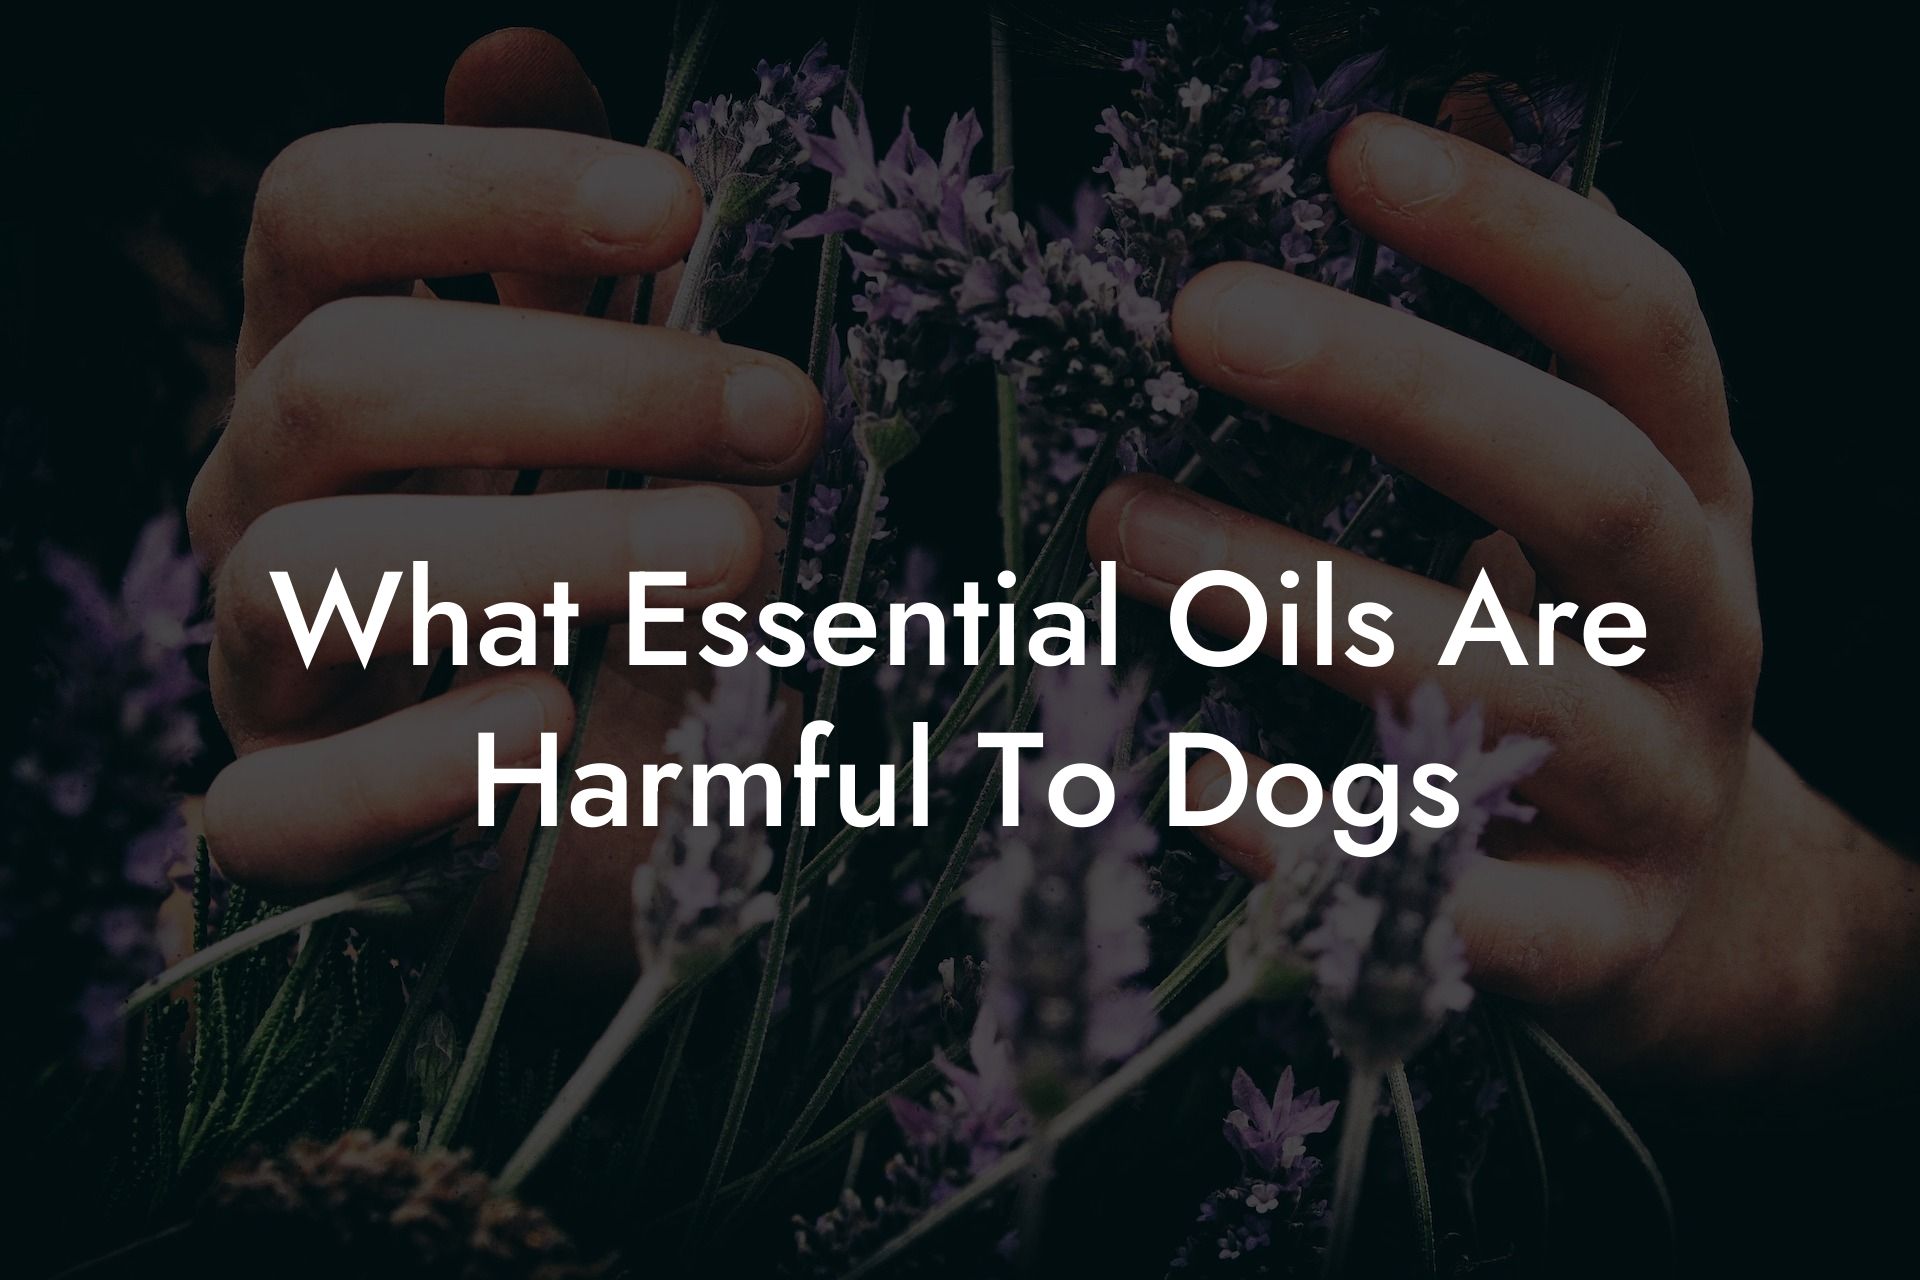 What Essential Oils Are Harmful To Dogs